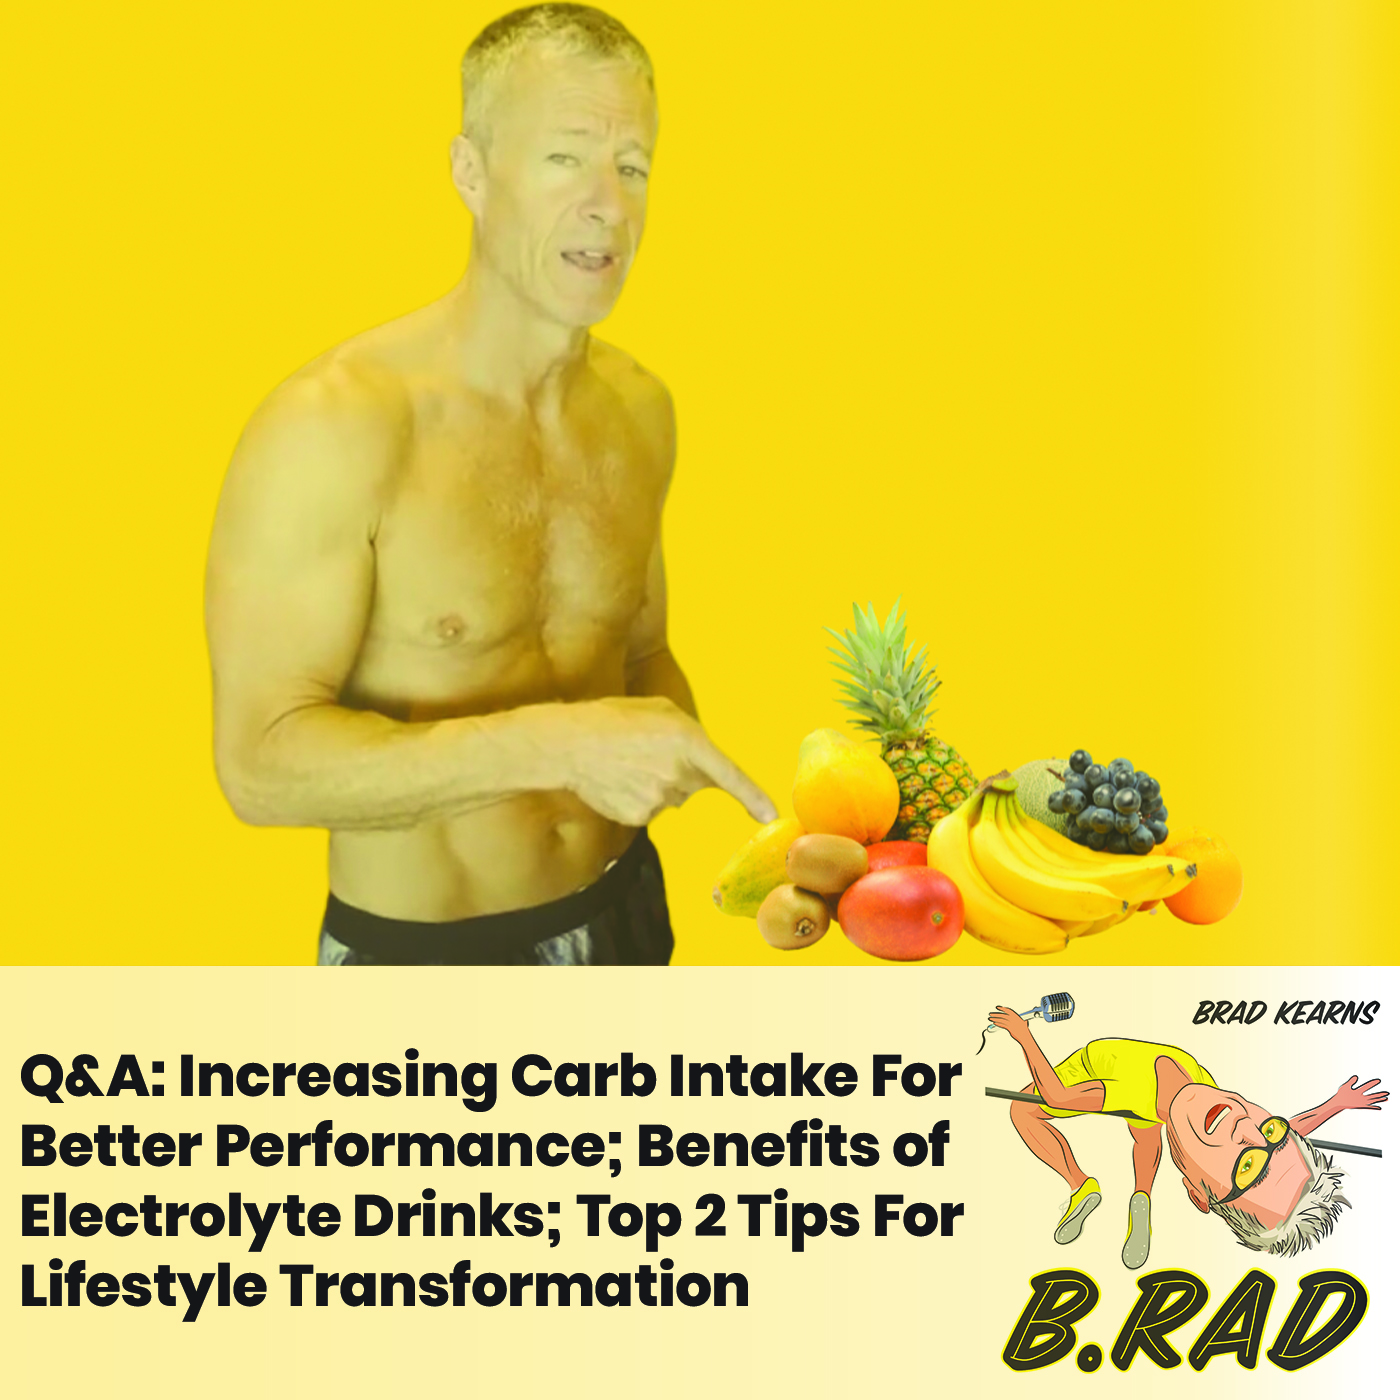 Q&A: Increasing Carb Intake For Better Performance; Benefits of Electrolyte Drinks; Top 2 Tips For Lifestyle Transformation